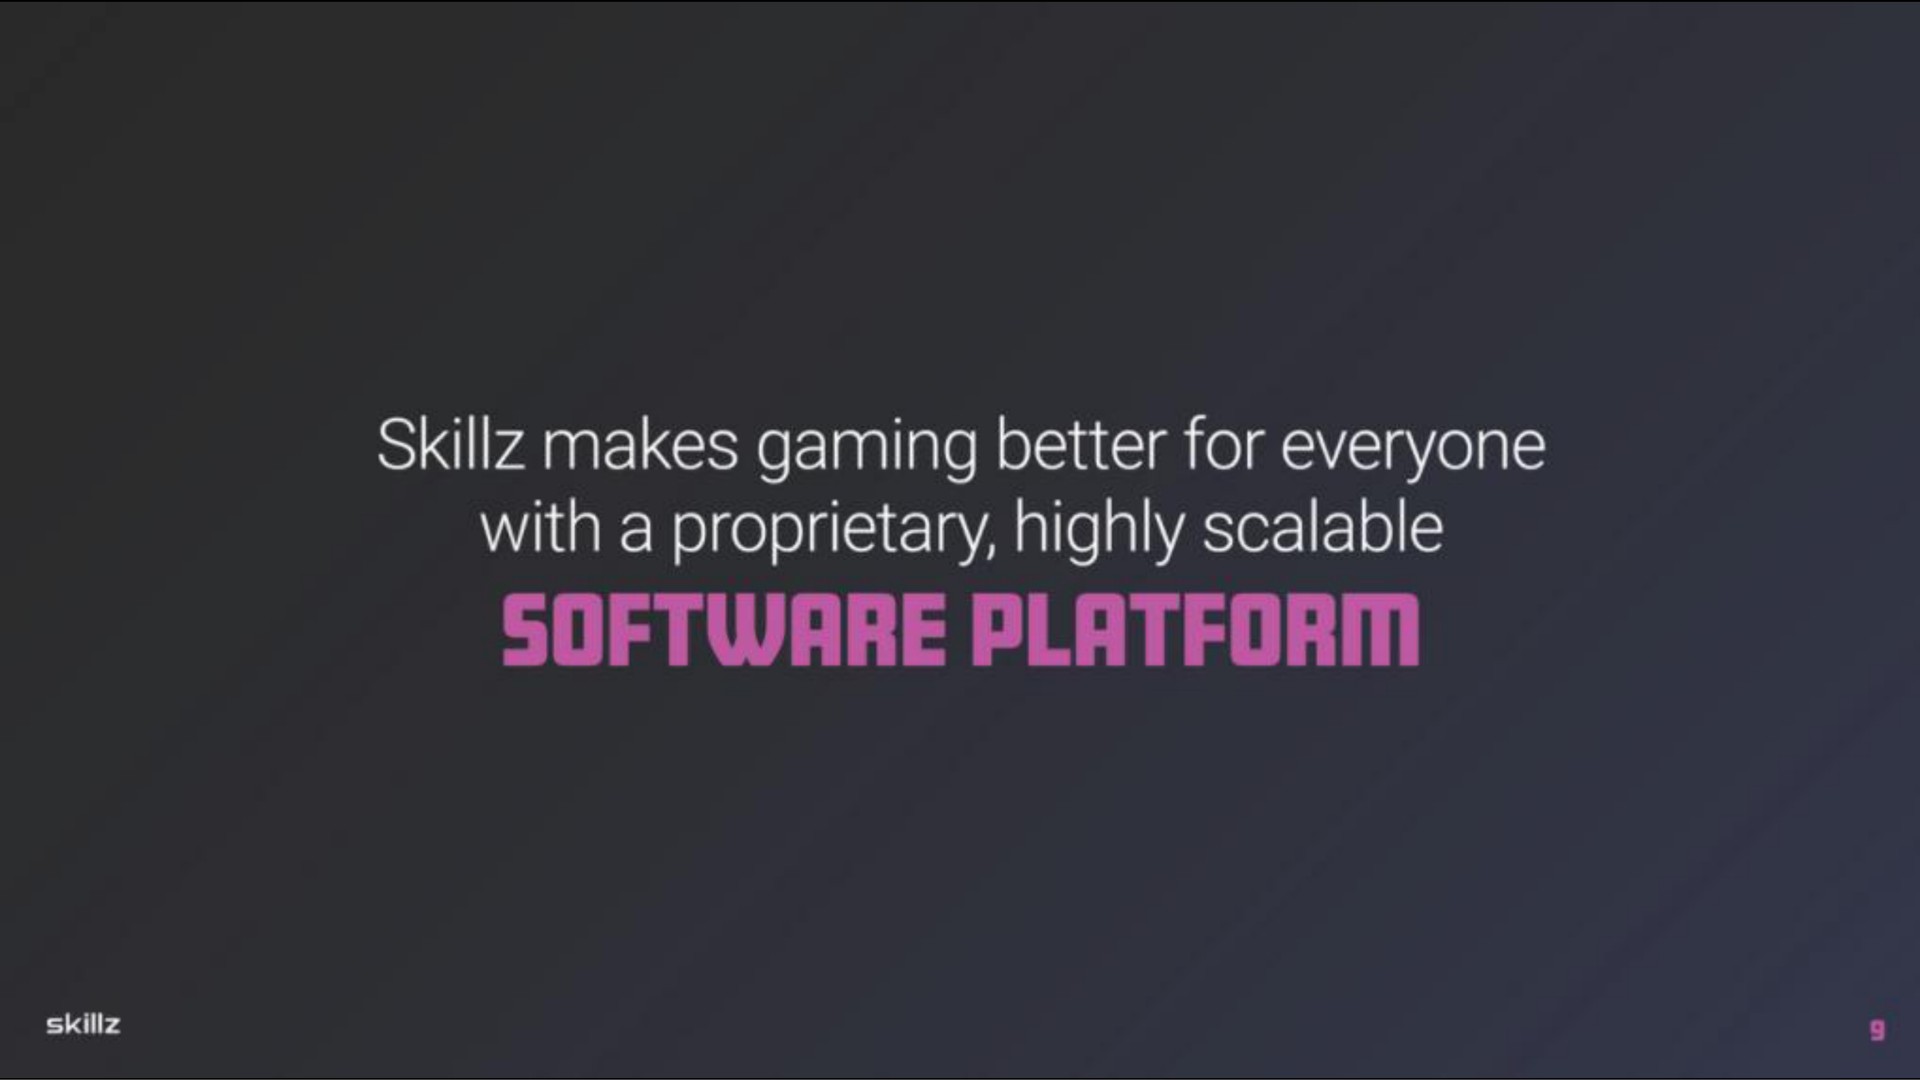 makes gaming better for everyone with a proprietary highly scalable platform | Skillz